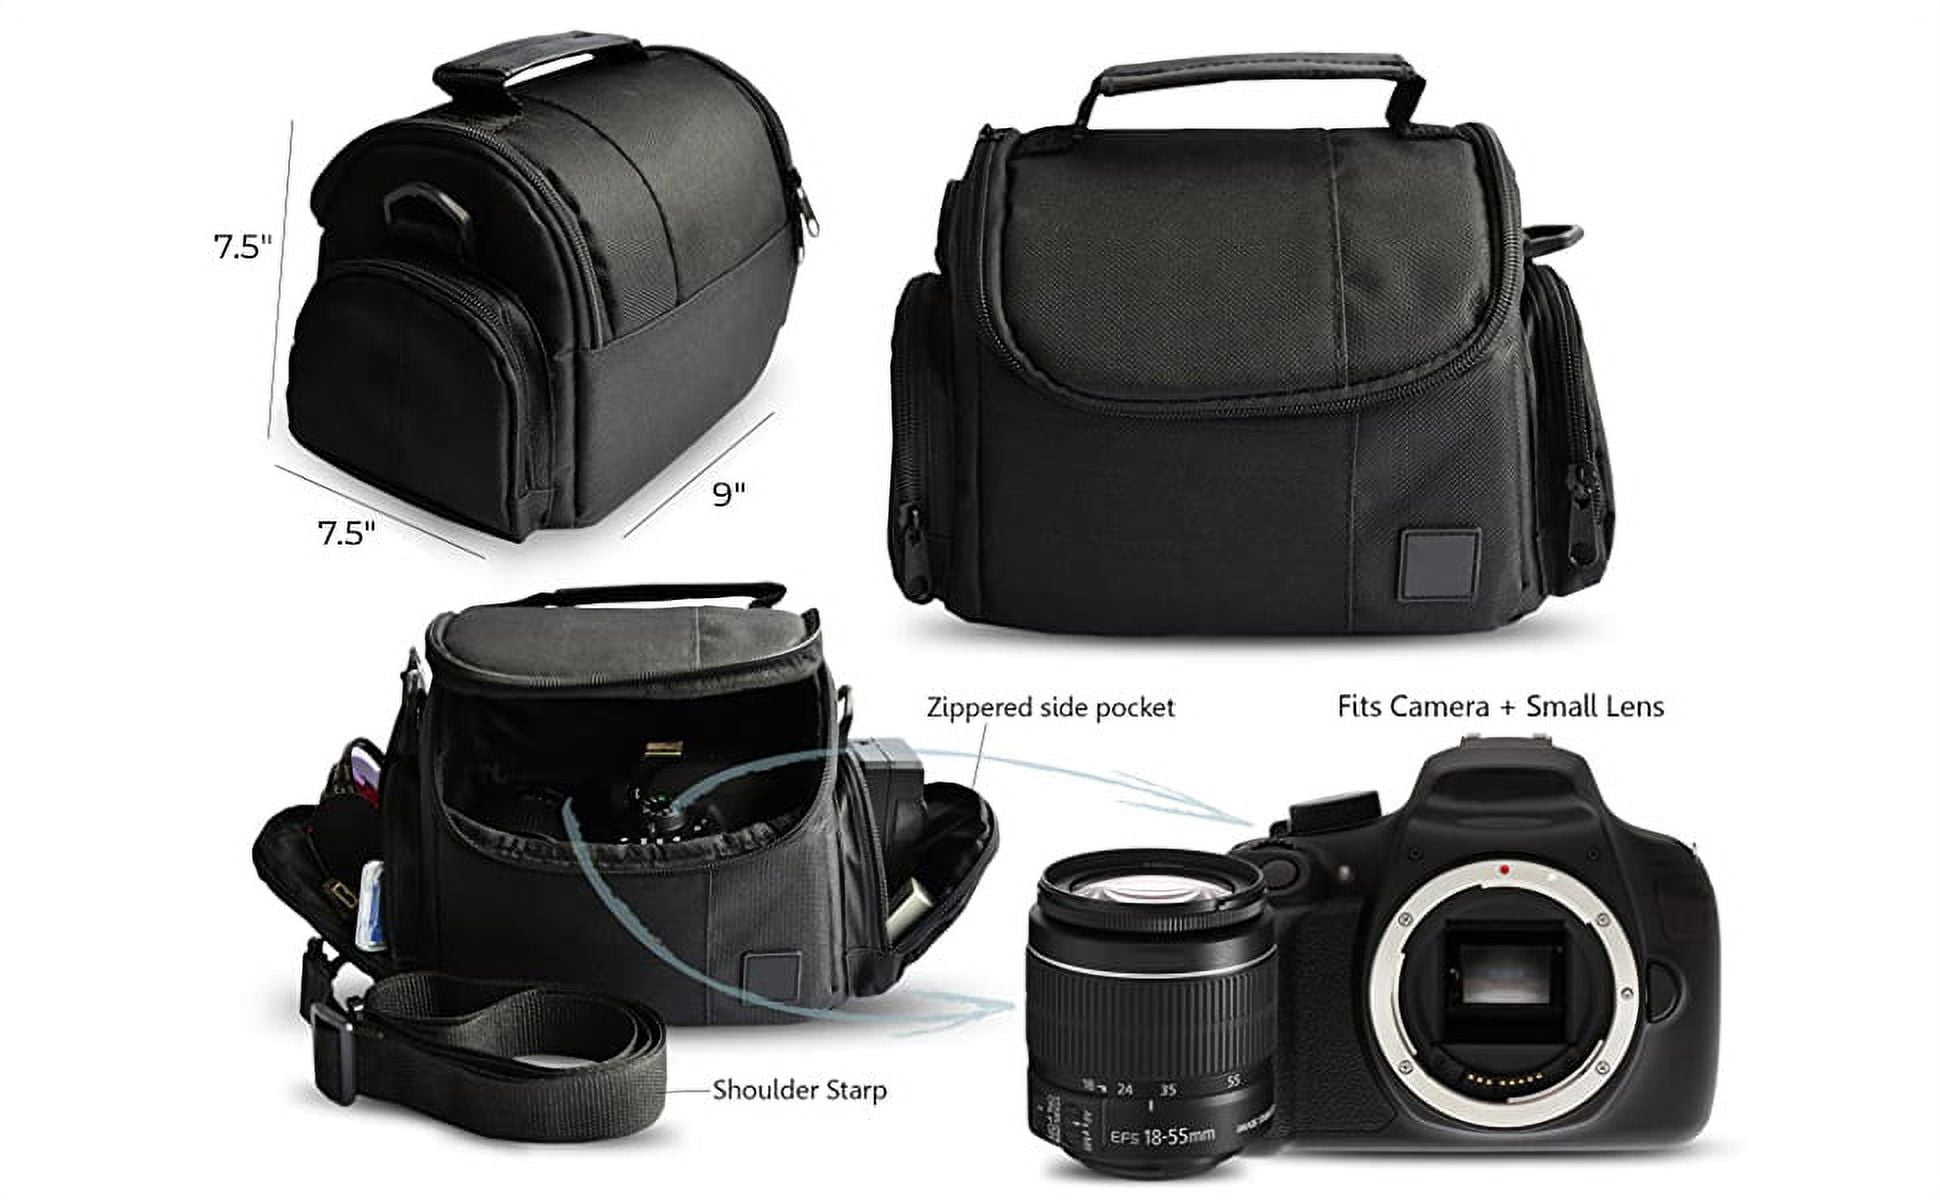 Amazon.com : Pro Deluxe Large Carrying Bag Camera Case for Canon EOS RP  M100 Rebel SL3 : Electronics